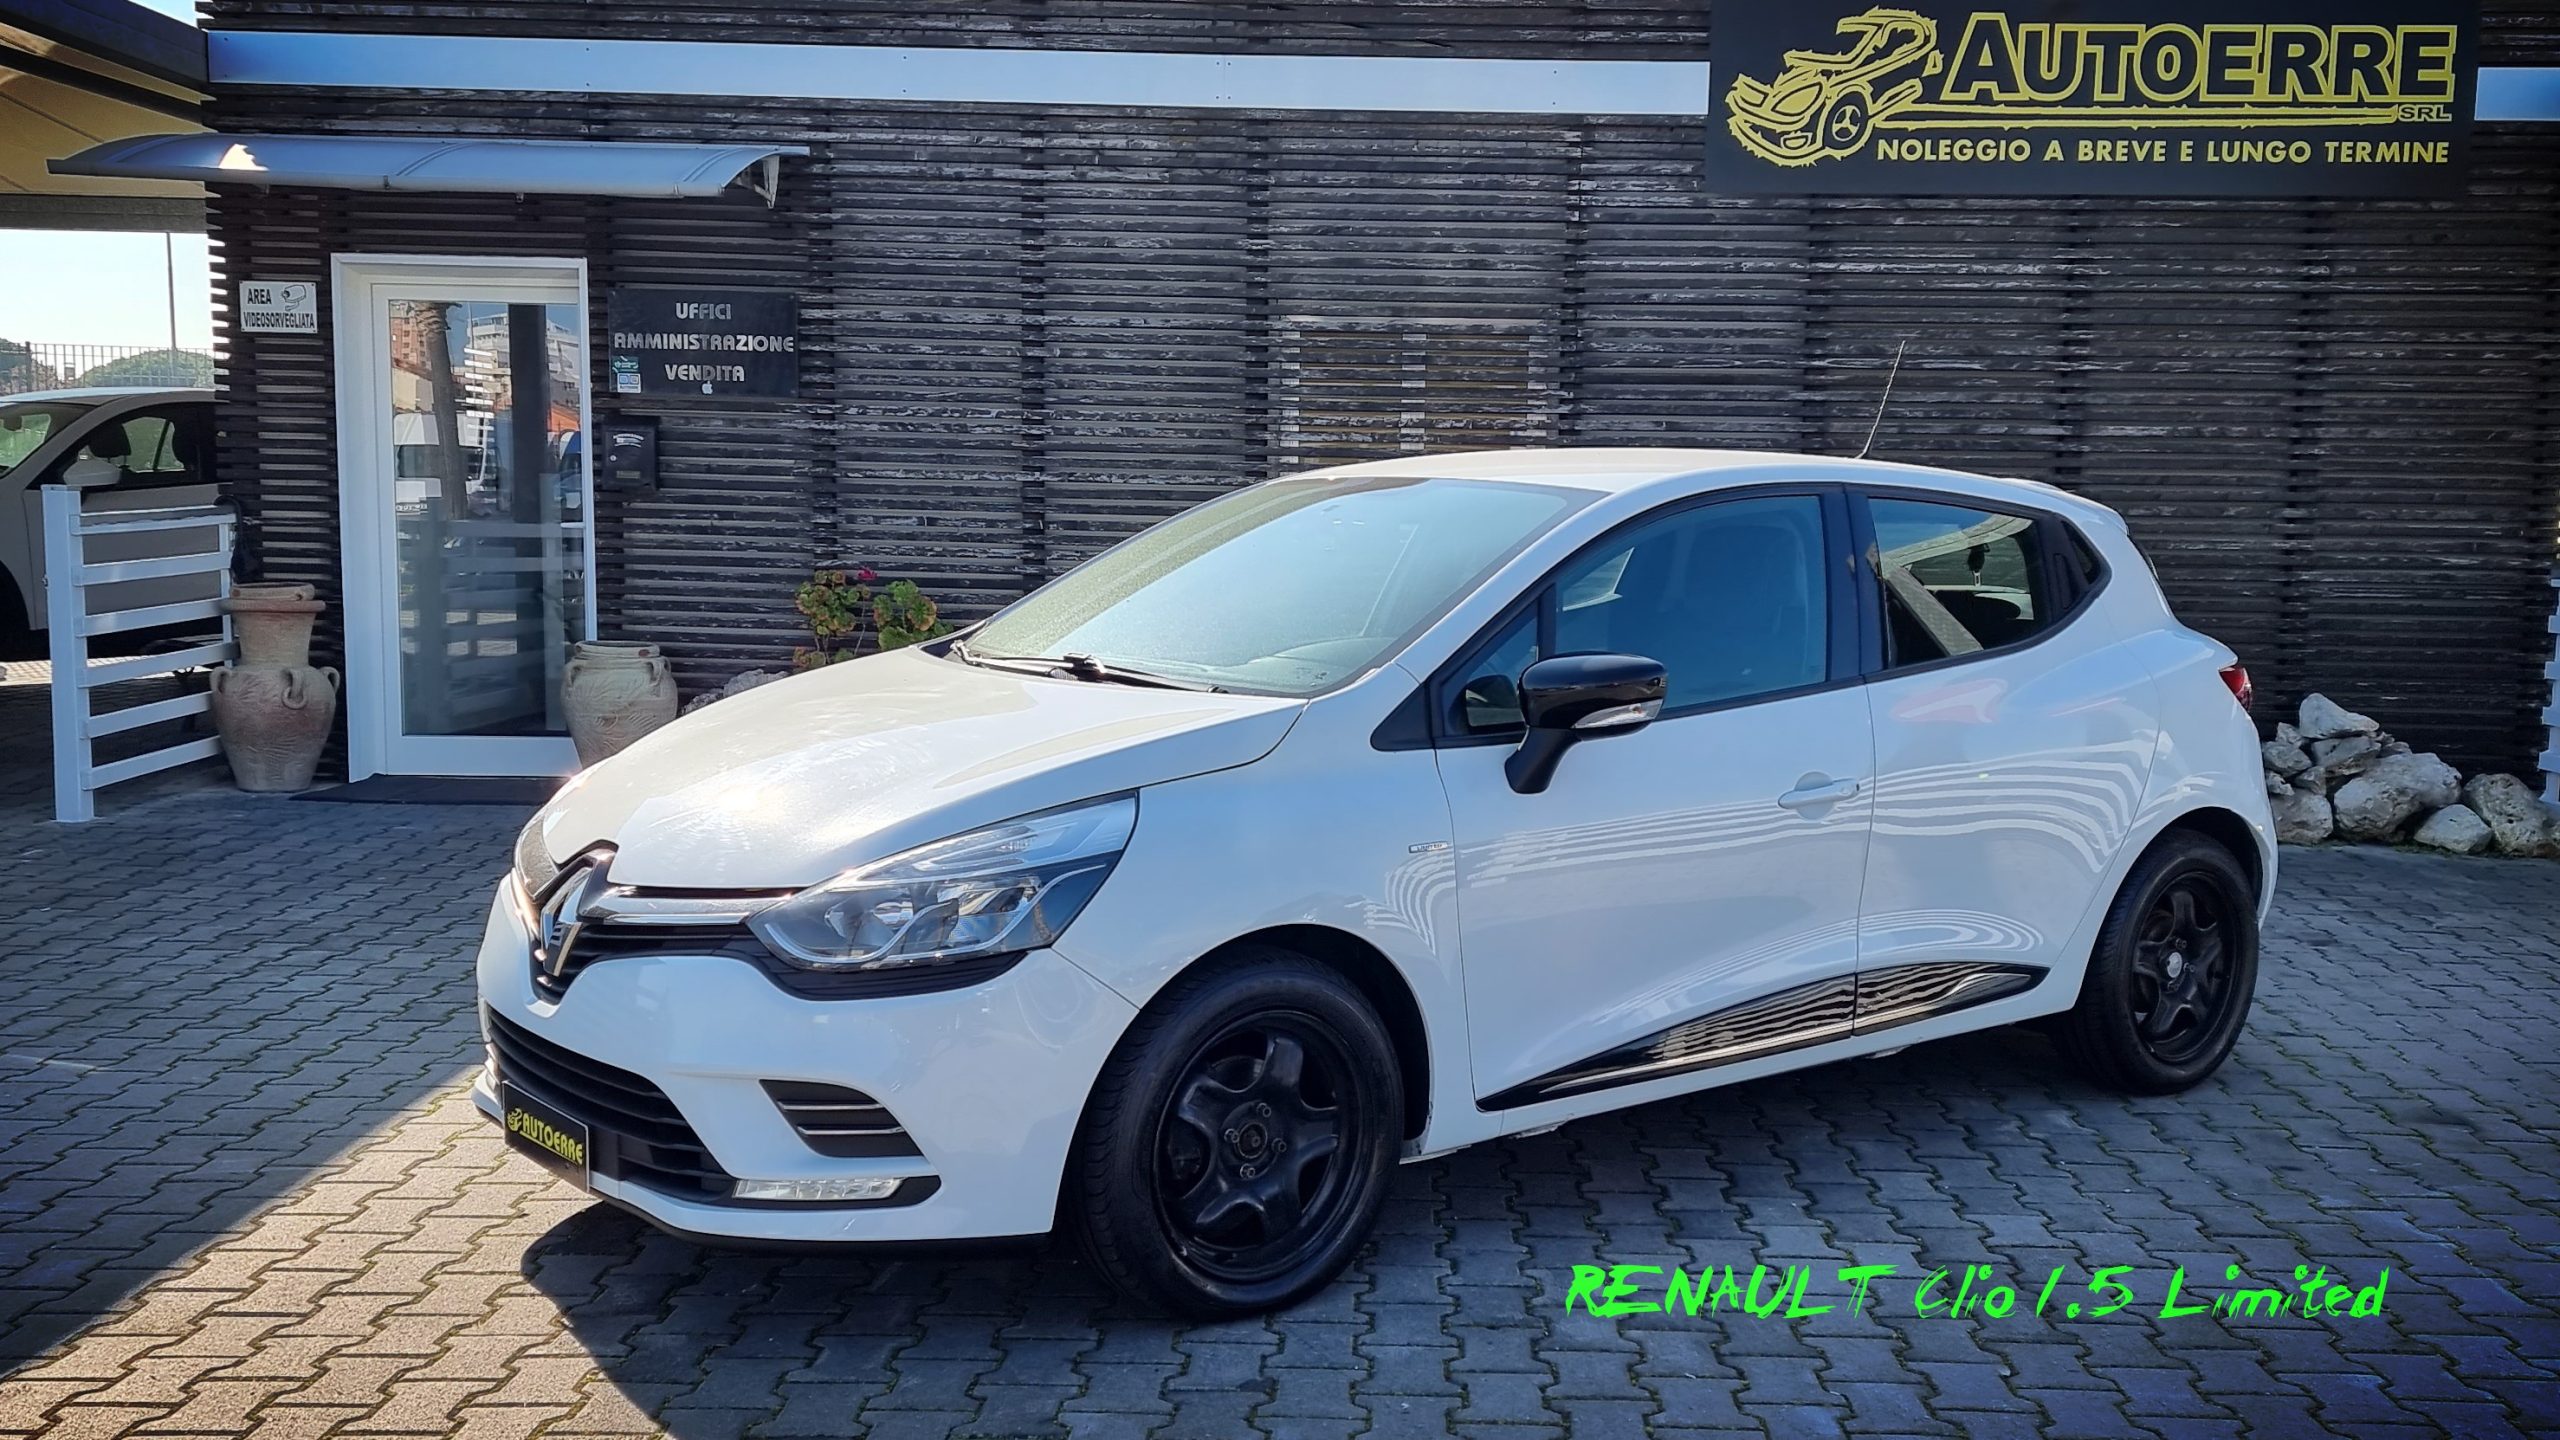 RENAULT CLIO 1.5 D Start&Stop Limited